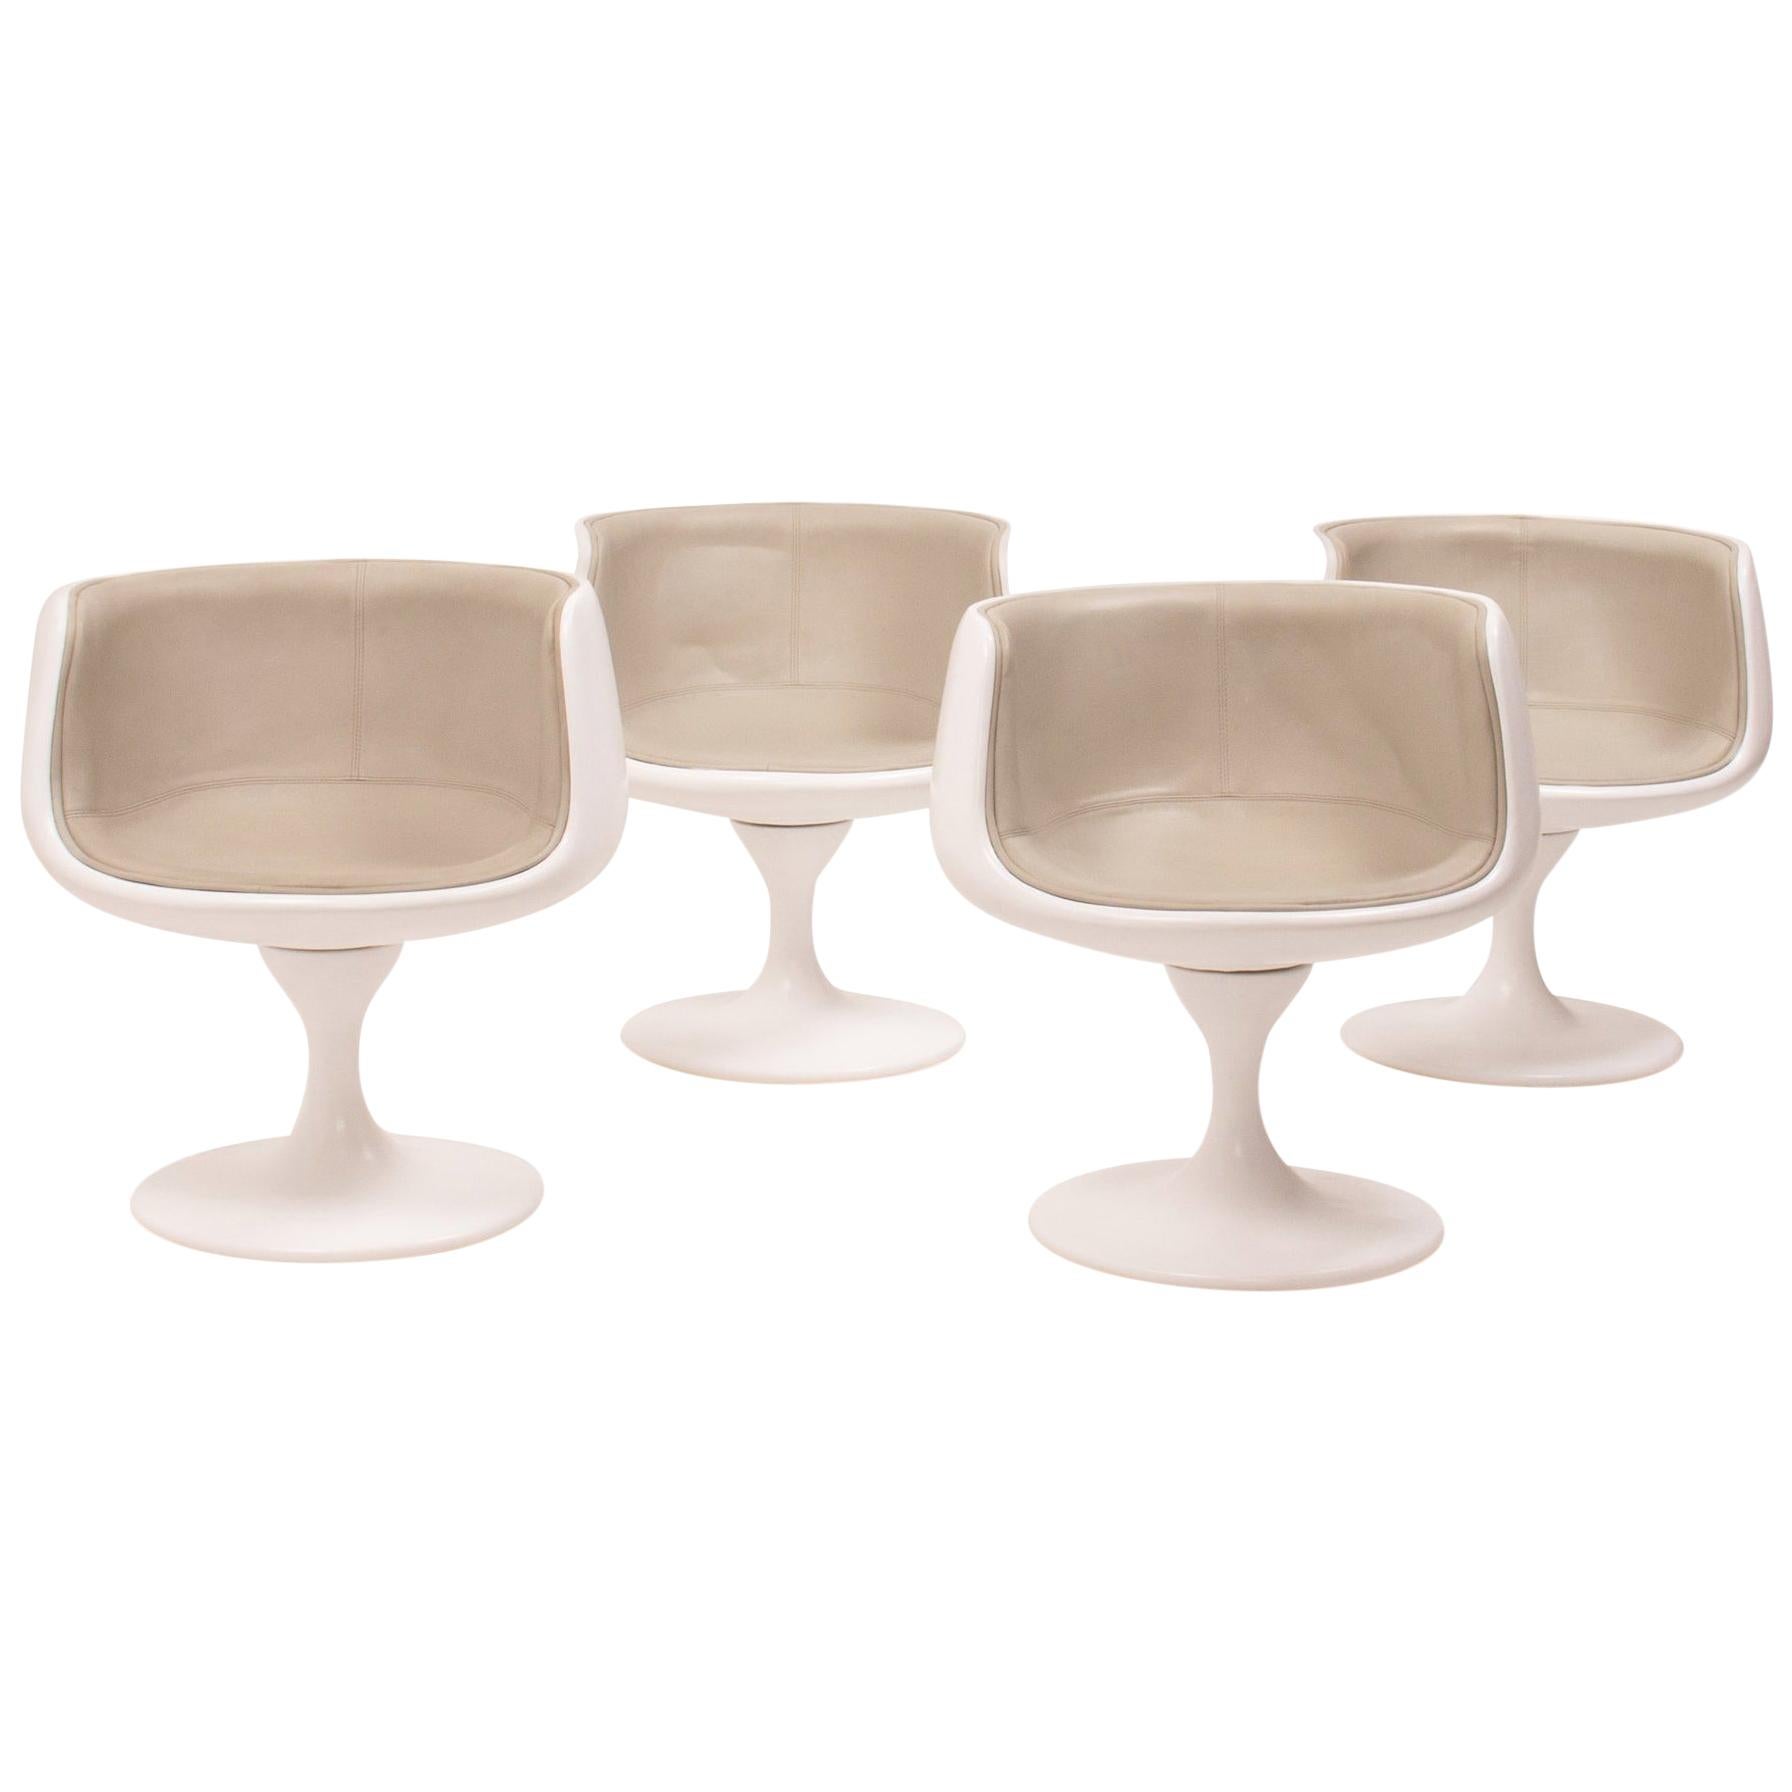 This set of four modern curved swivel tulip tub chairs have a sleek, modernist aesthetic and feature the iconic ‘tulip’ style base originally designed by Eero Saarinen. 

The chairs have moulded curved white shells, which have been newly